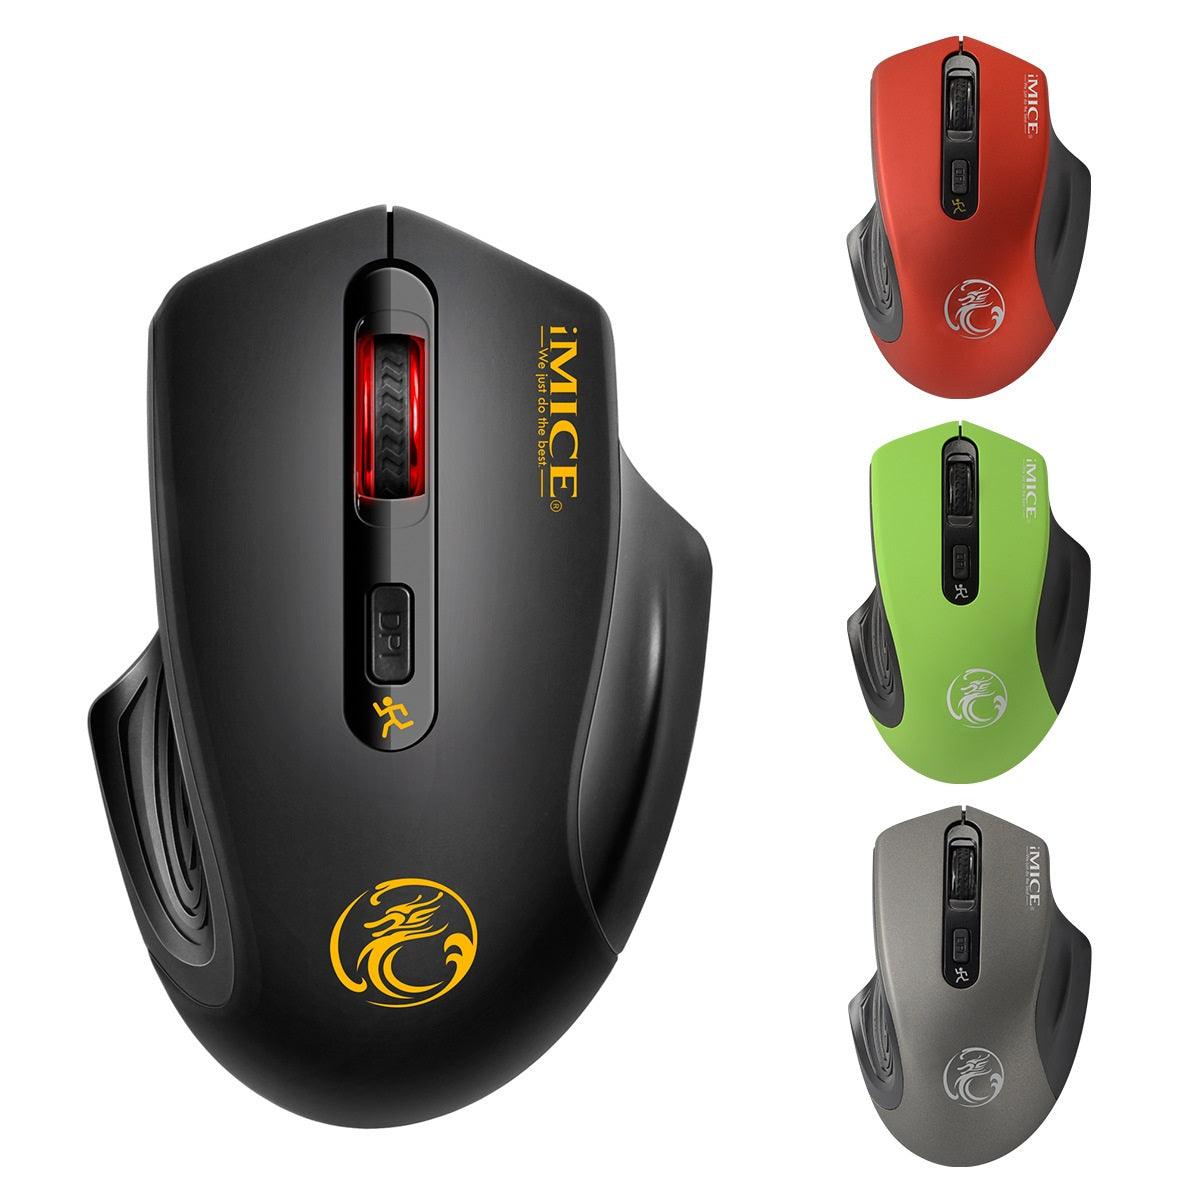 2.4G wireless mouse - Nioor